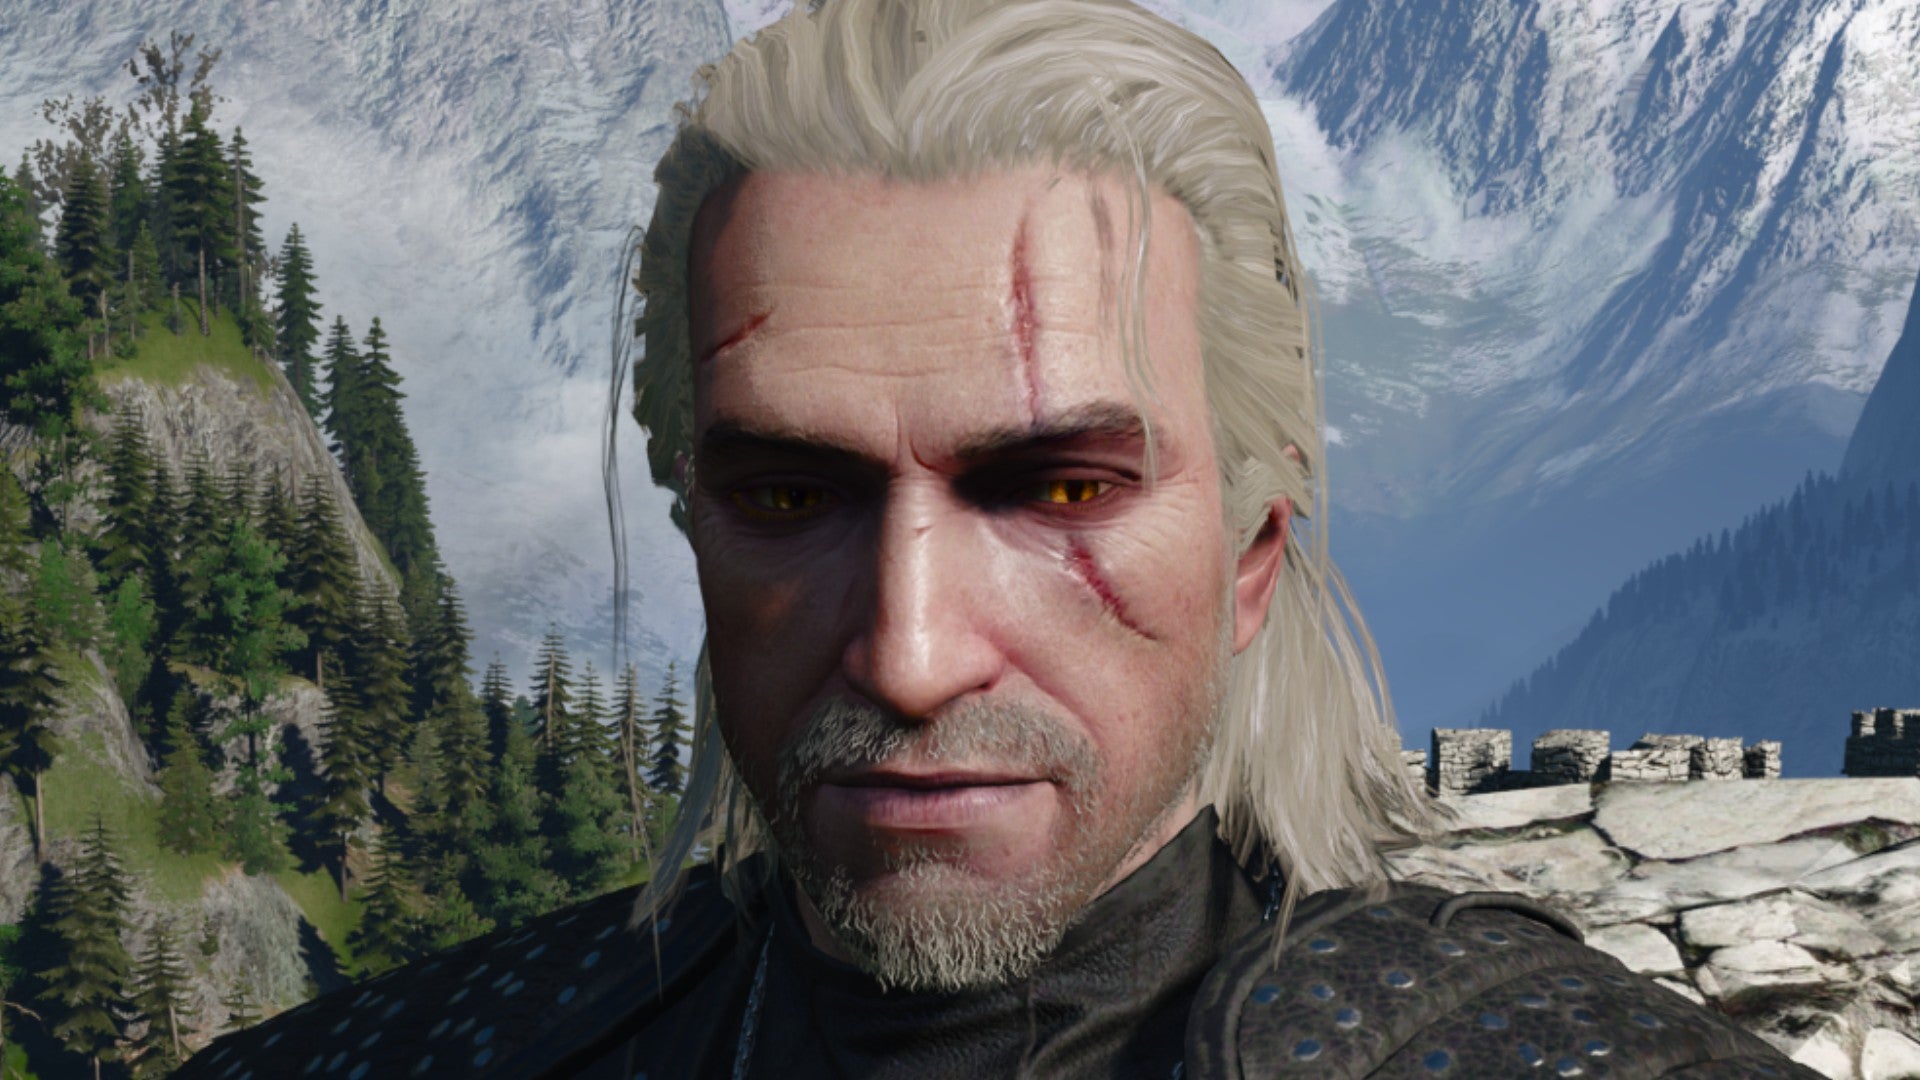 Witcher 3 image showing Geralt with a short beard.